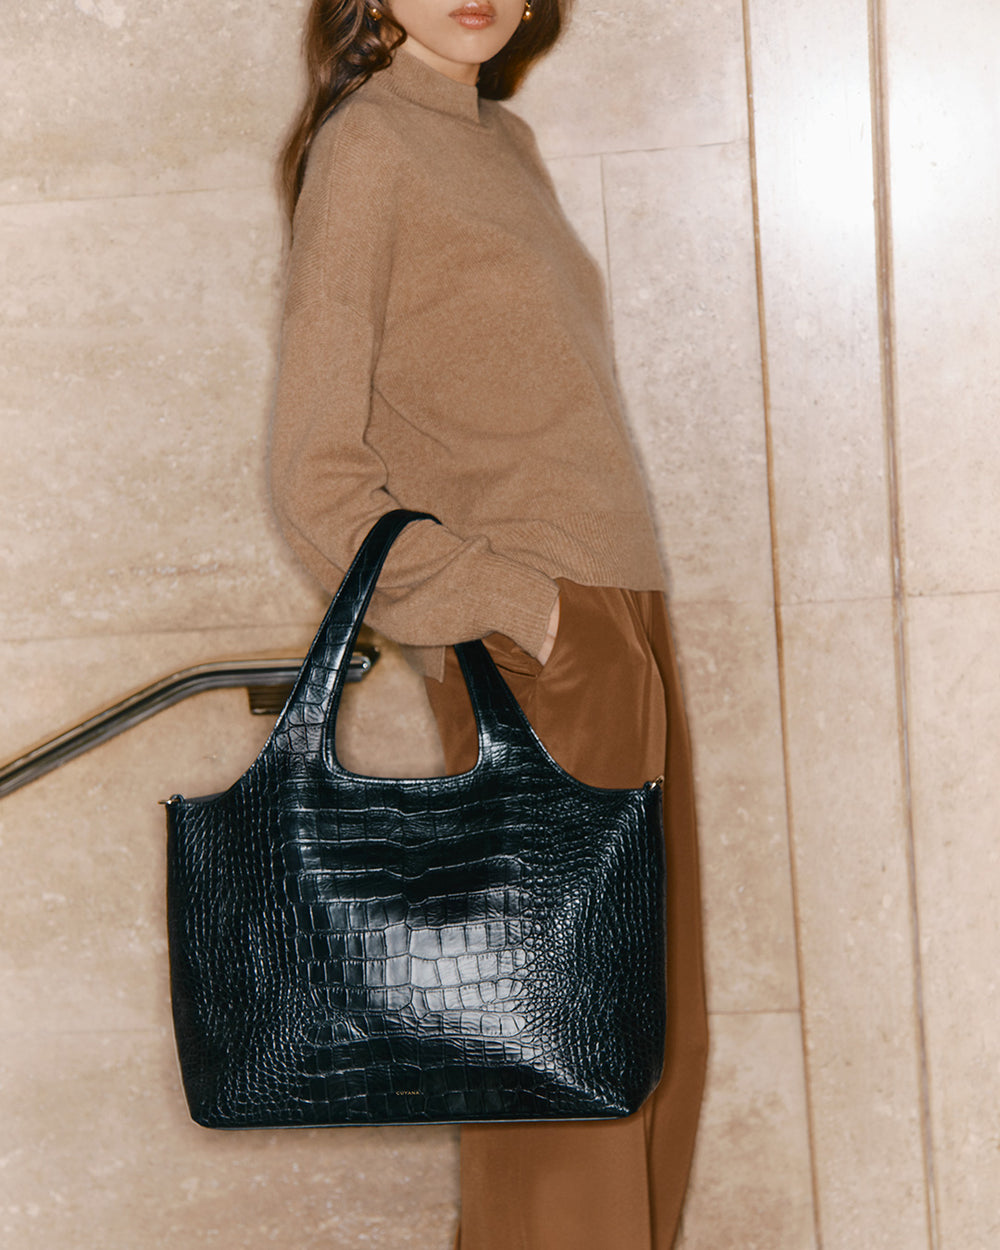 Woman in a turtleneck carrying a large handbag, standing indoors.